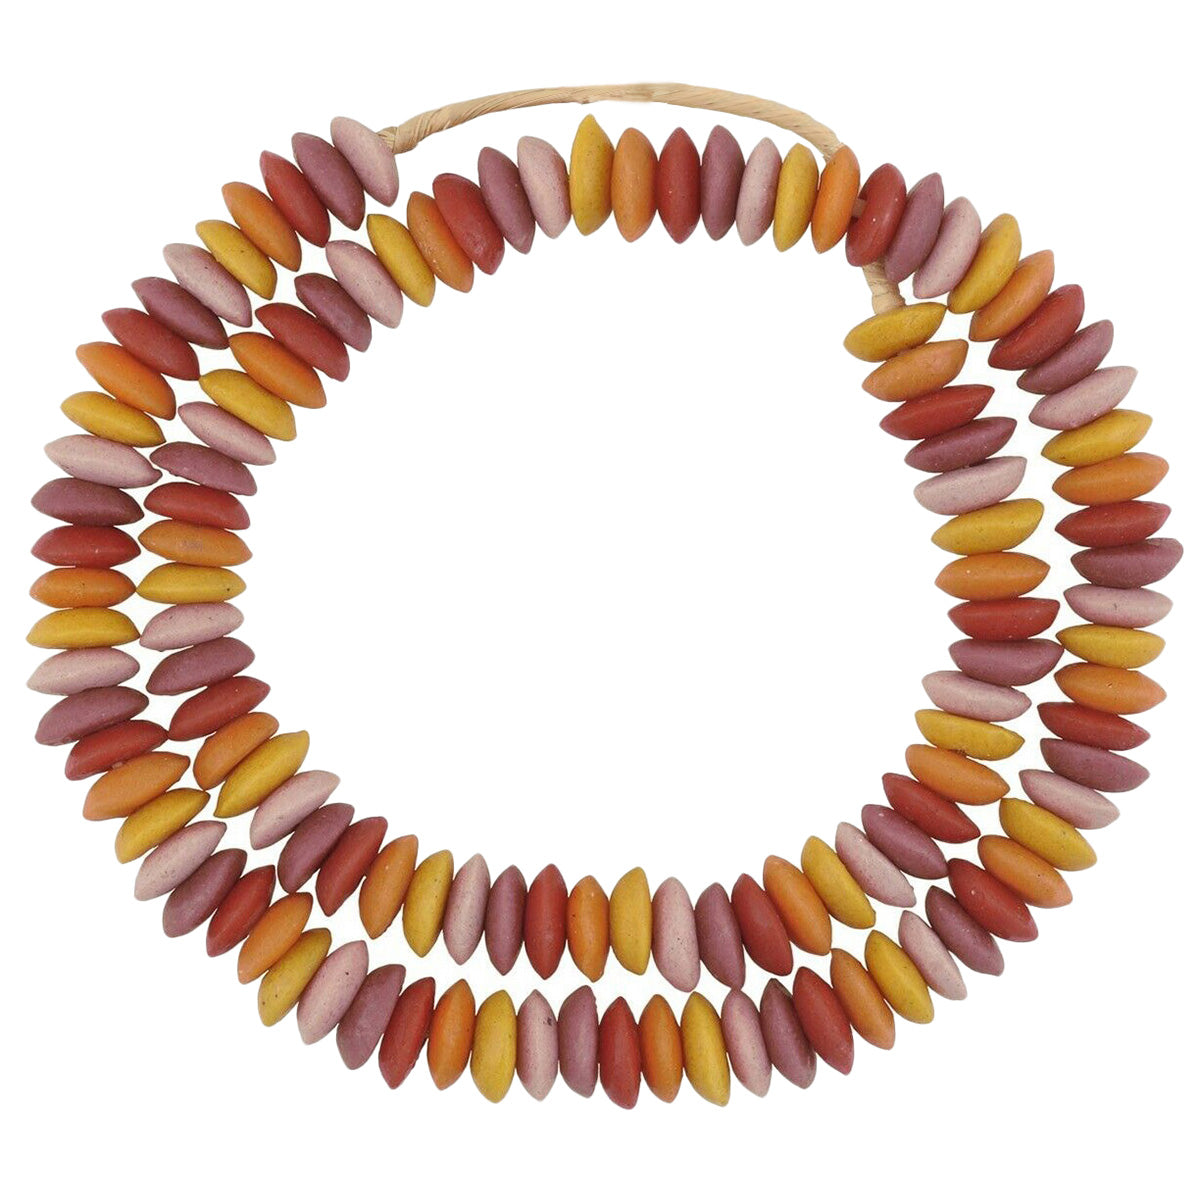 African Krobo recycled glass beads handmade Ghana necklace disks spacers - Tribalgh